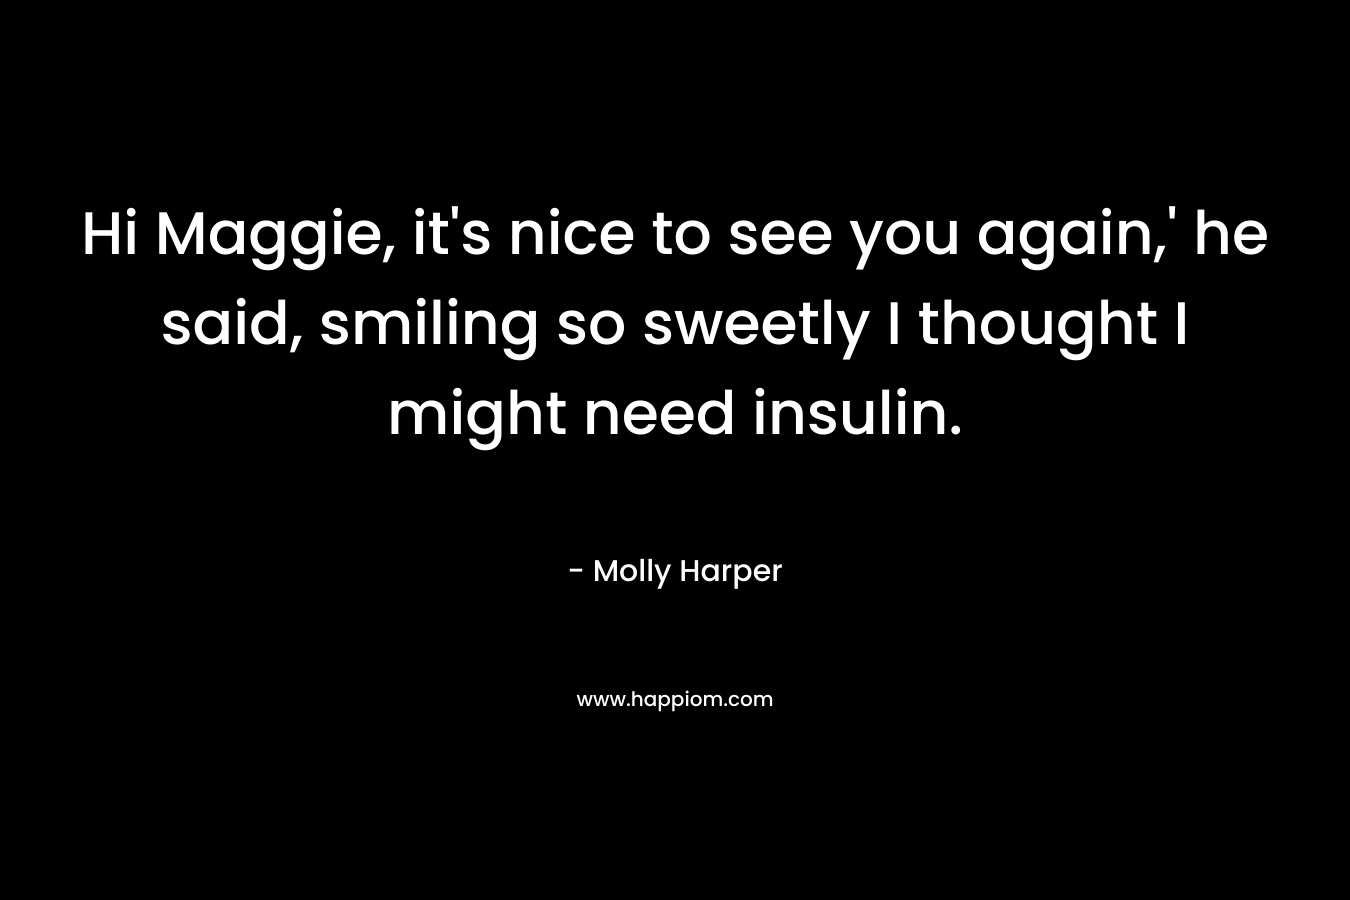 Hi Maggie, it's nice to see you again,' he said, smiling so sweetly I thought I might need insulin.